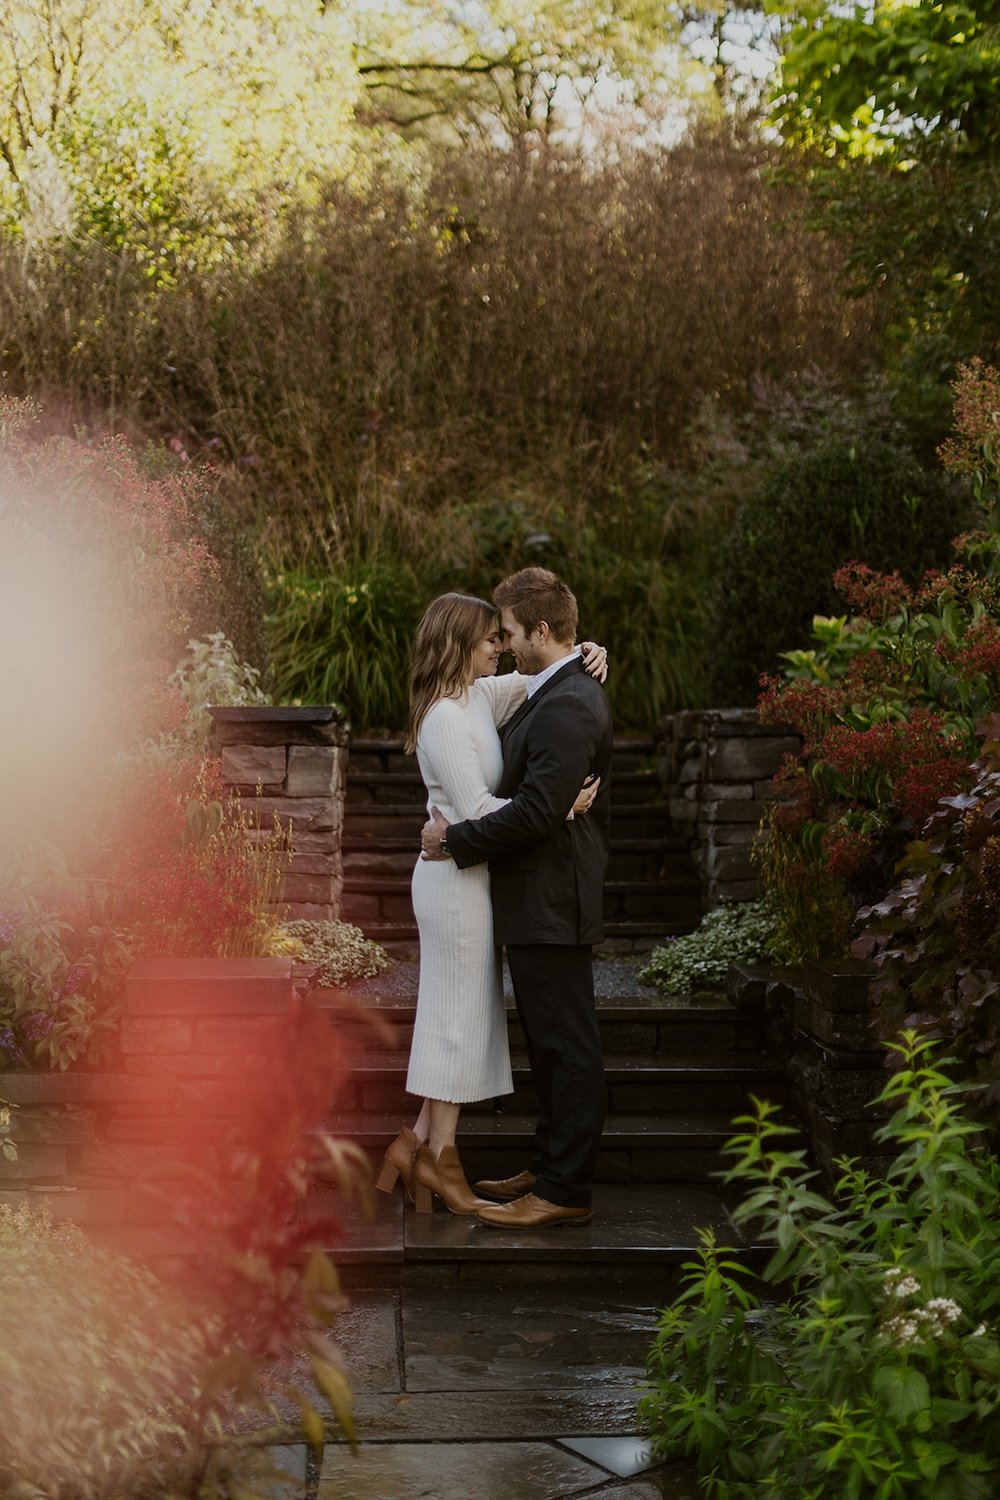  The couple stand on the steps holding one another close wrapped in one another’s love. Greenery surrounds the couple with dark stone stopes.  